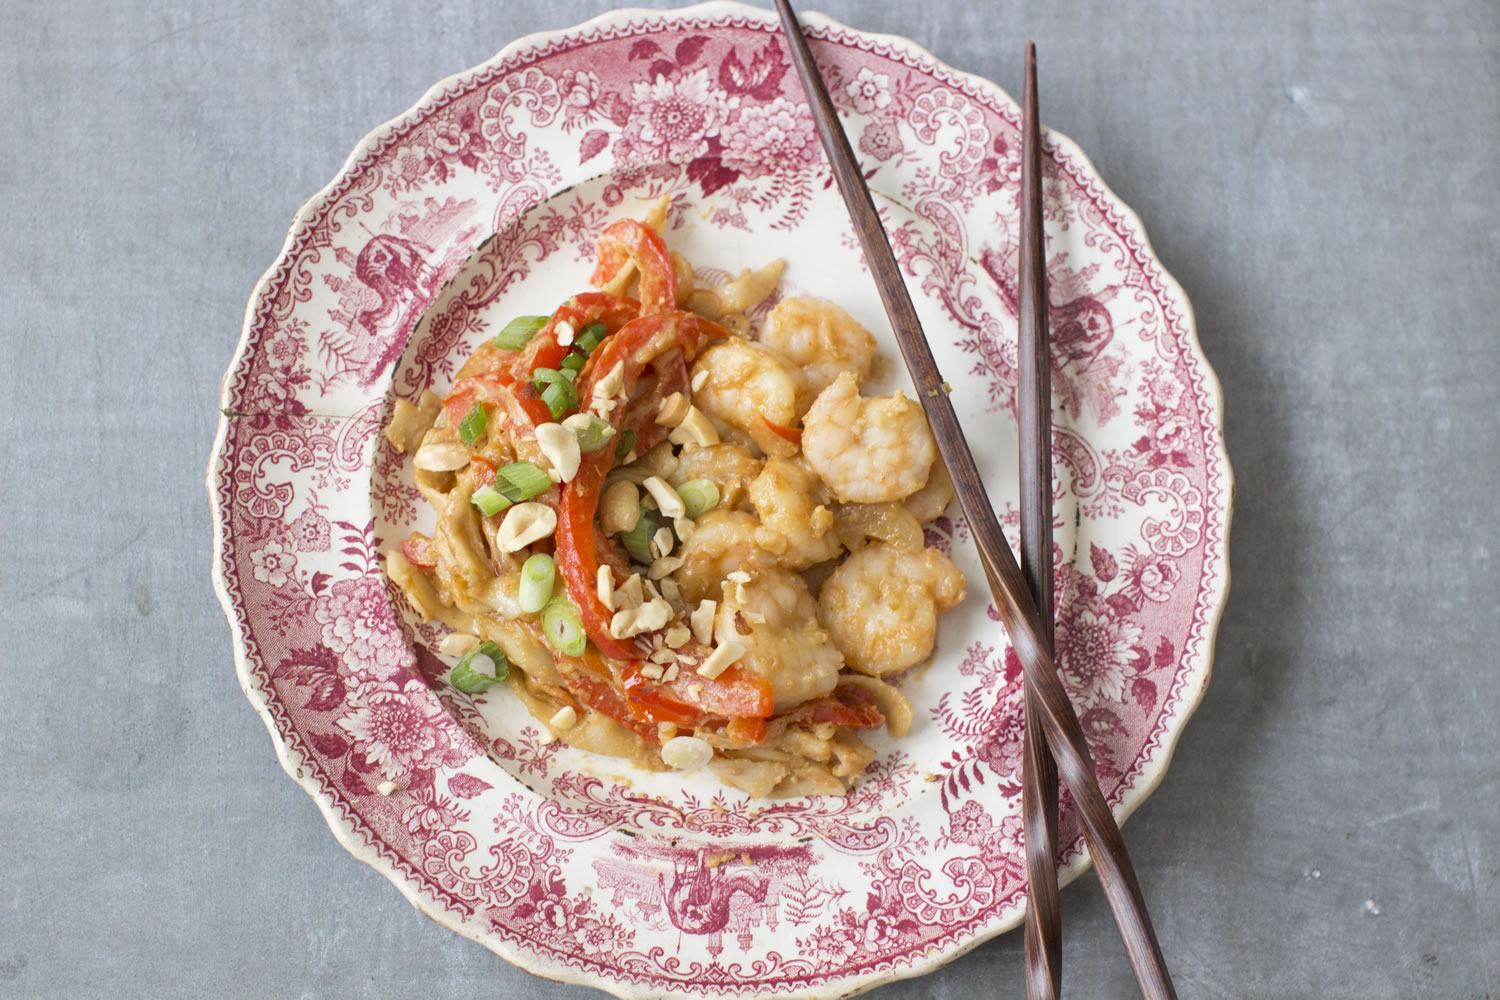 Fried udon noodles with red peppers and shrimp, all slathered in a spicy peanut sauce is simple and filling.